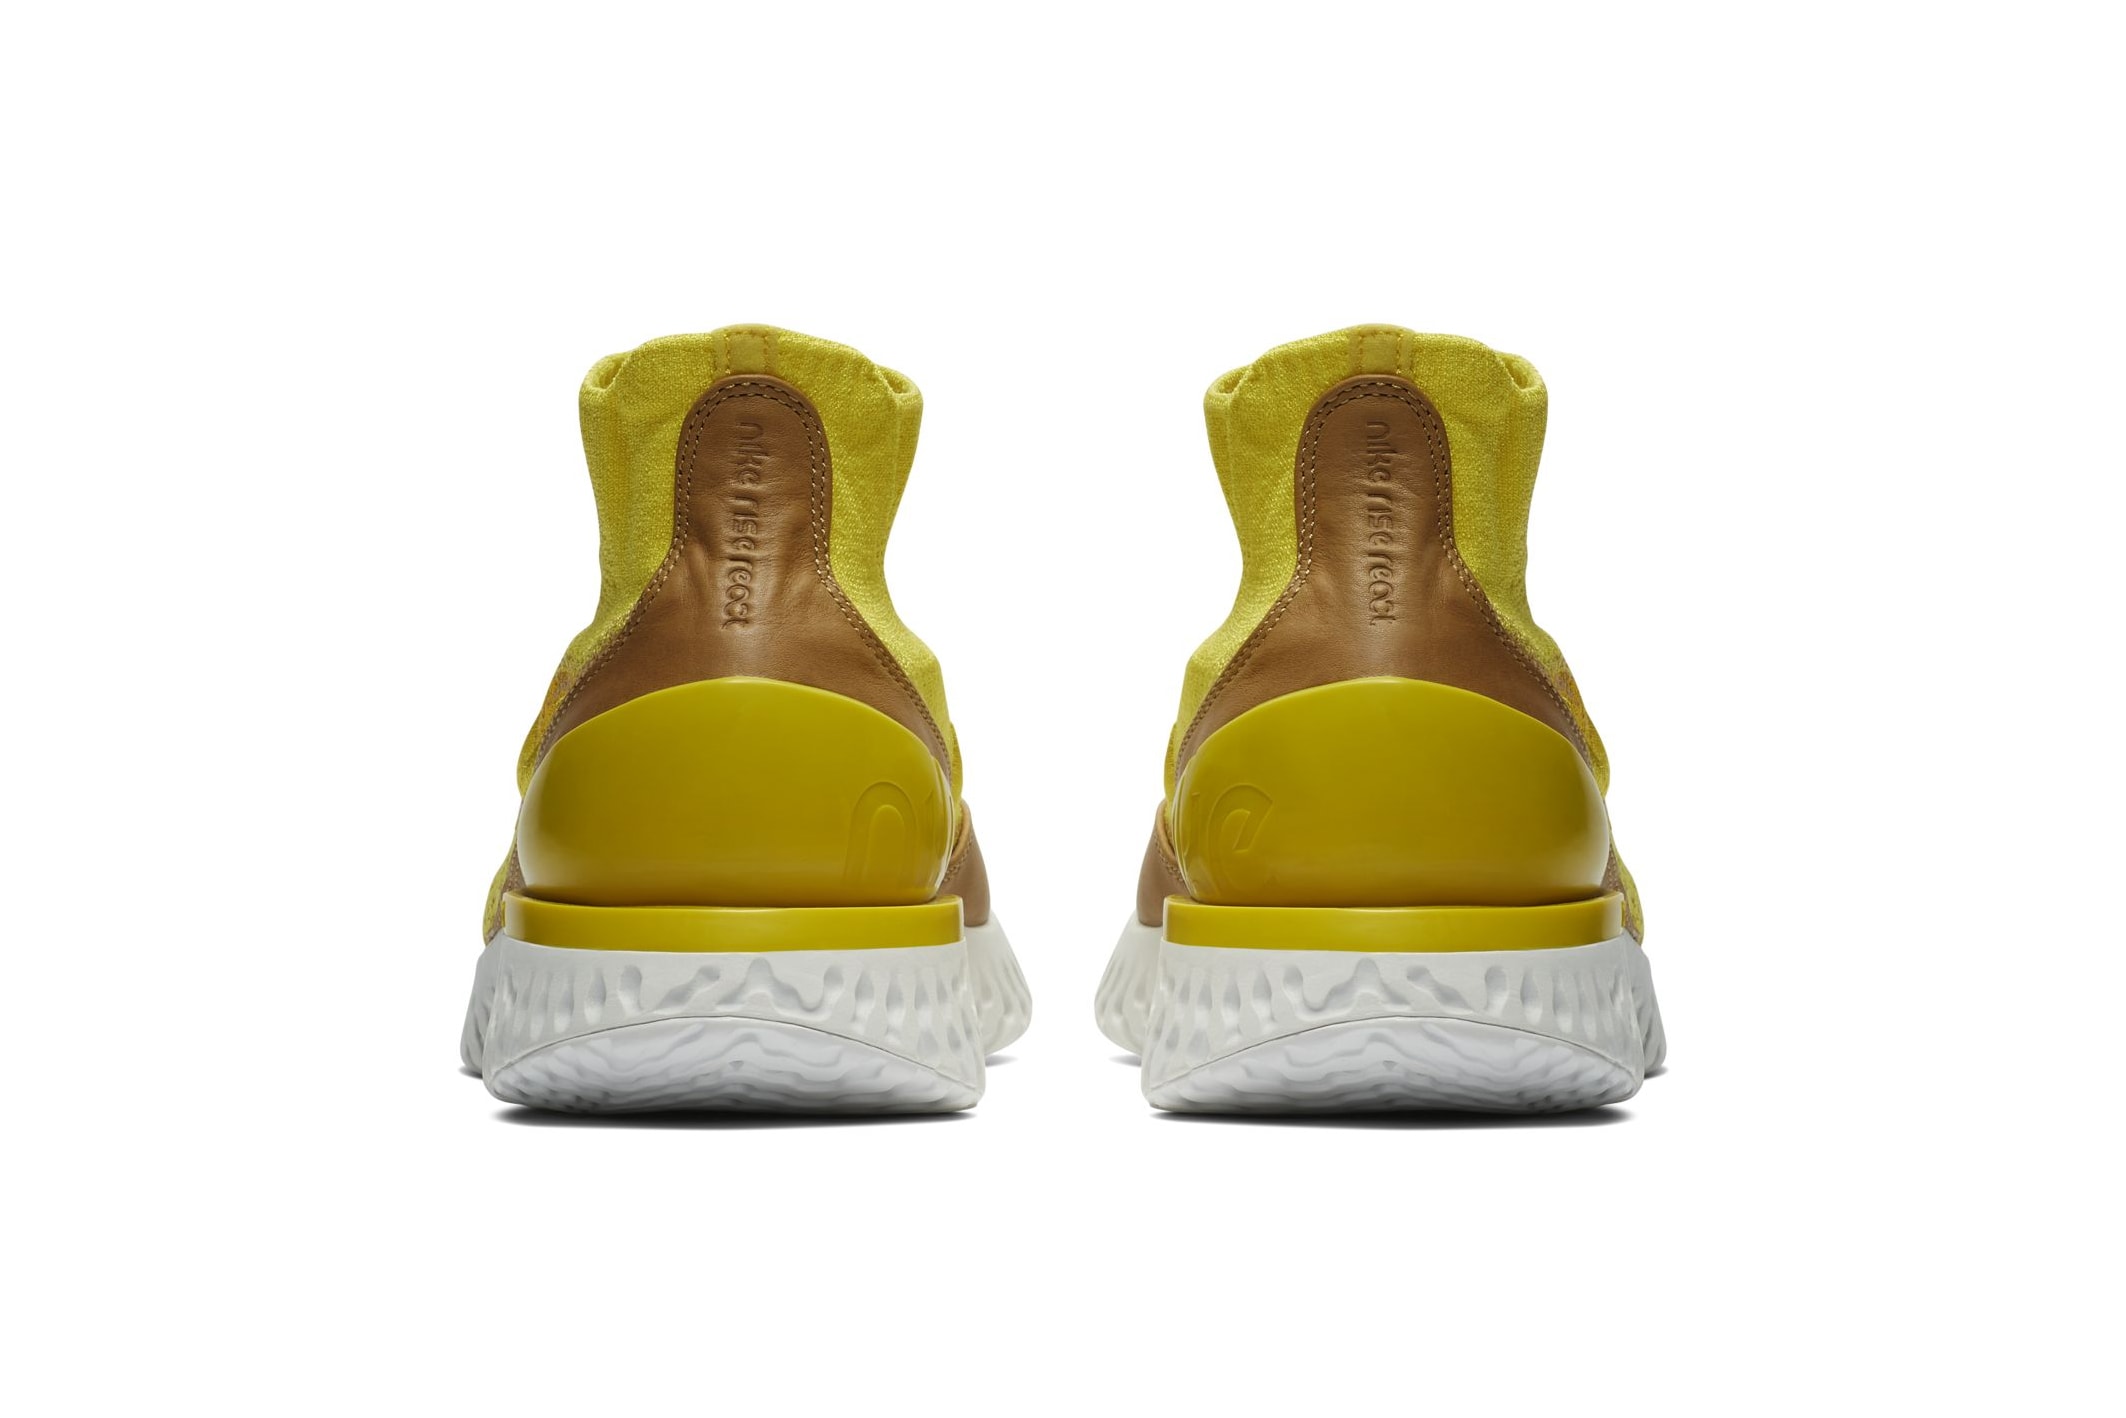 Nike Rise React Flyknit "Sonic Yellow" Release date sneaker sock colorway price purchase "SONIC YELLOW/DARK STUCCO-AMARILLO"